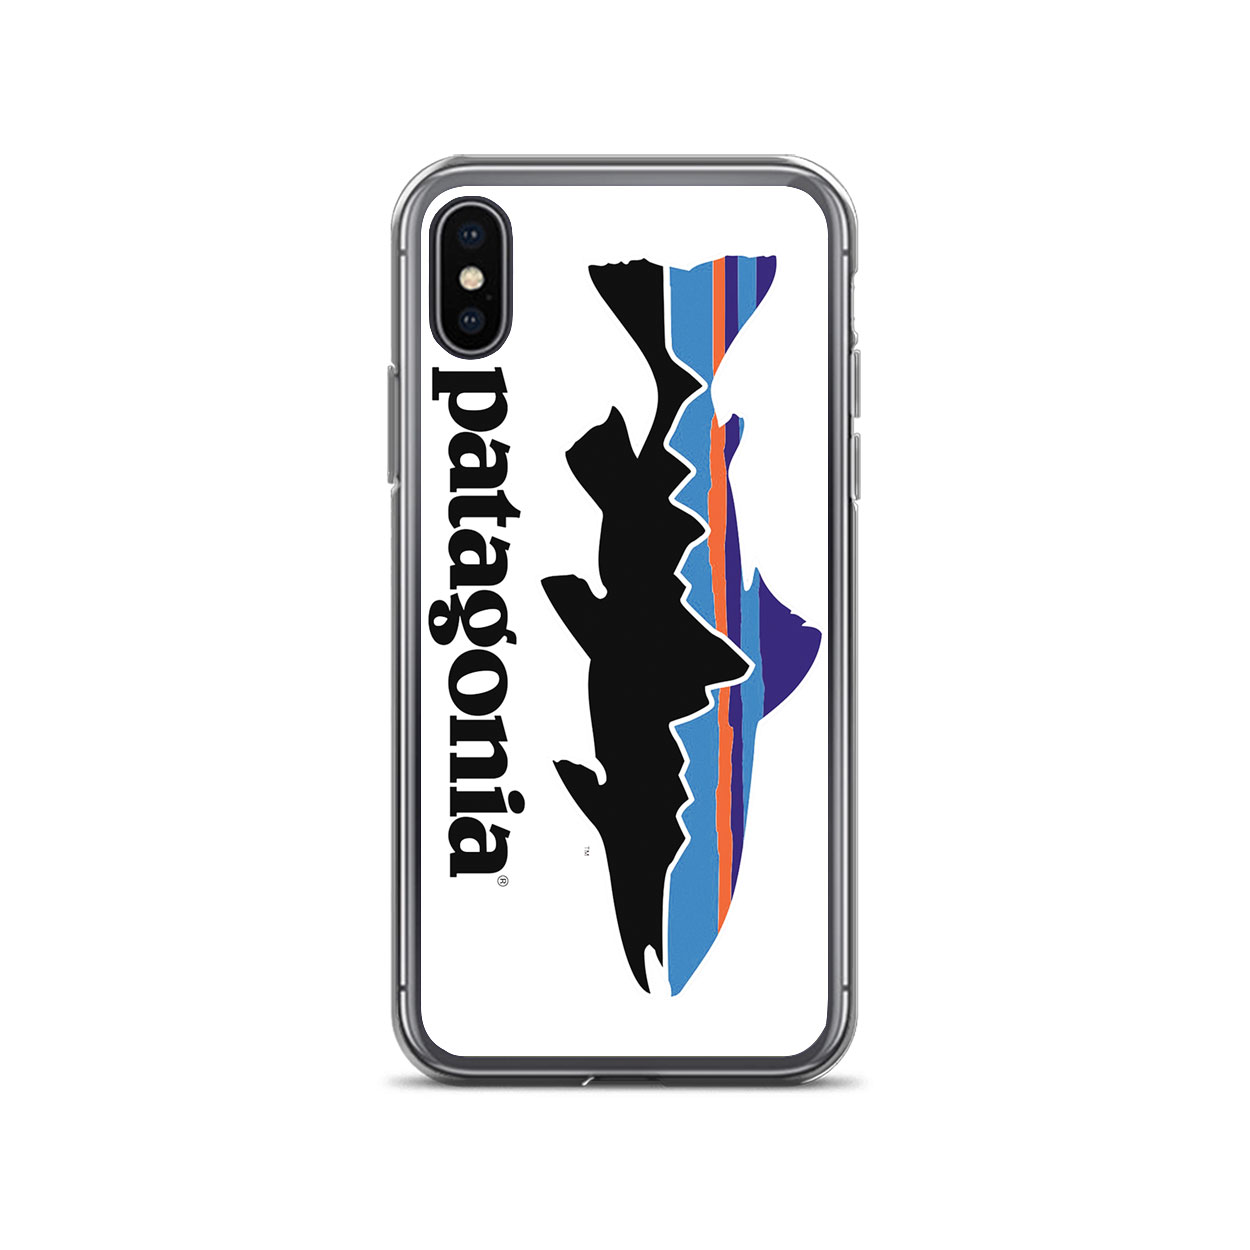 Patagonia Fishing Logo iPhone Case for XS/XS Max,XR,X,8/8 Plus,7